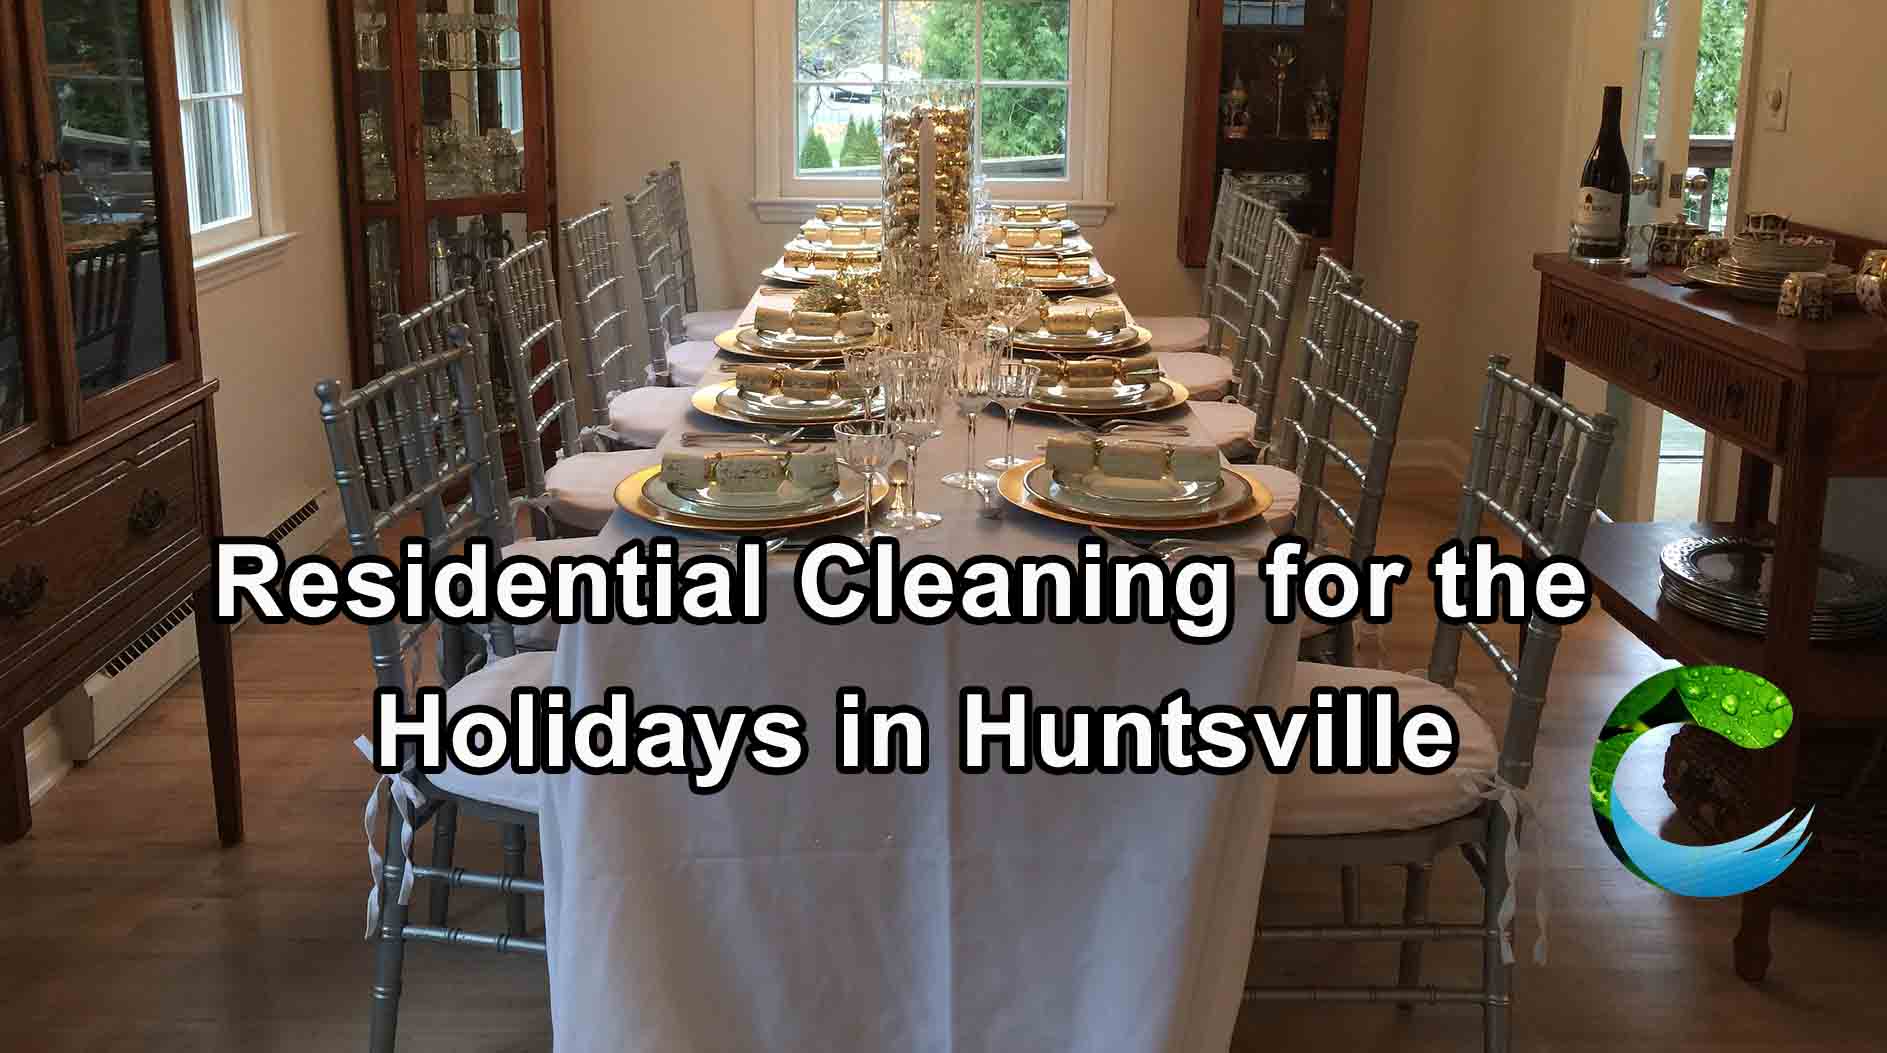 Residential Cleaning for the Holidays in Huntsville